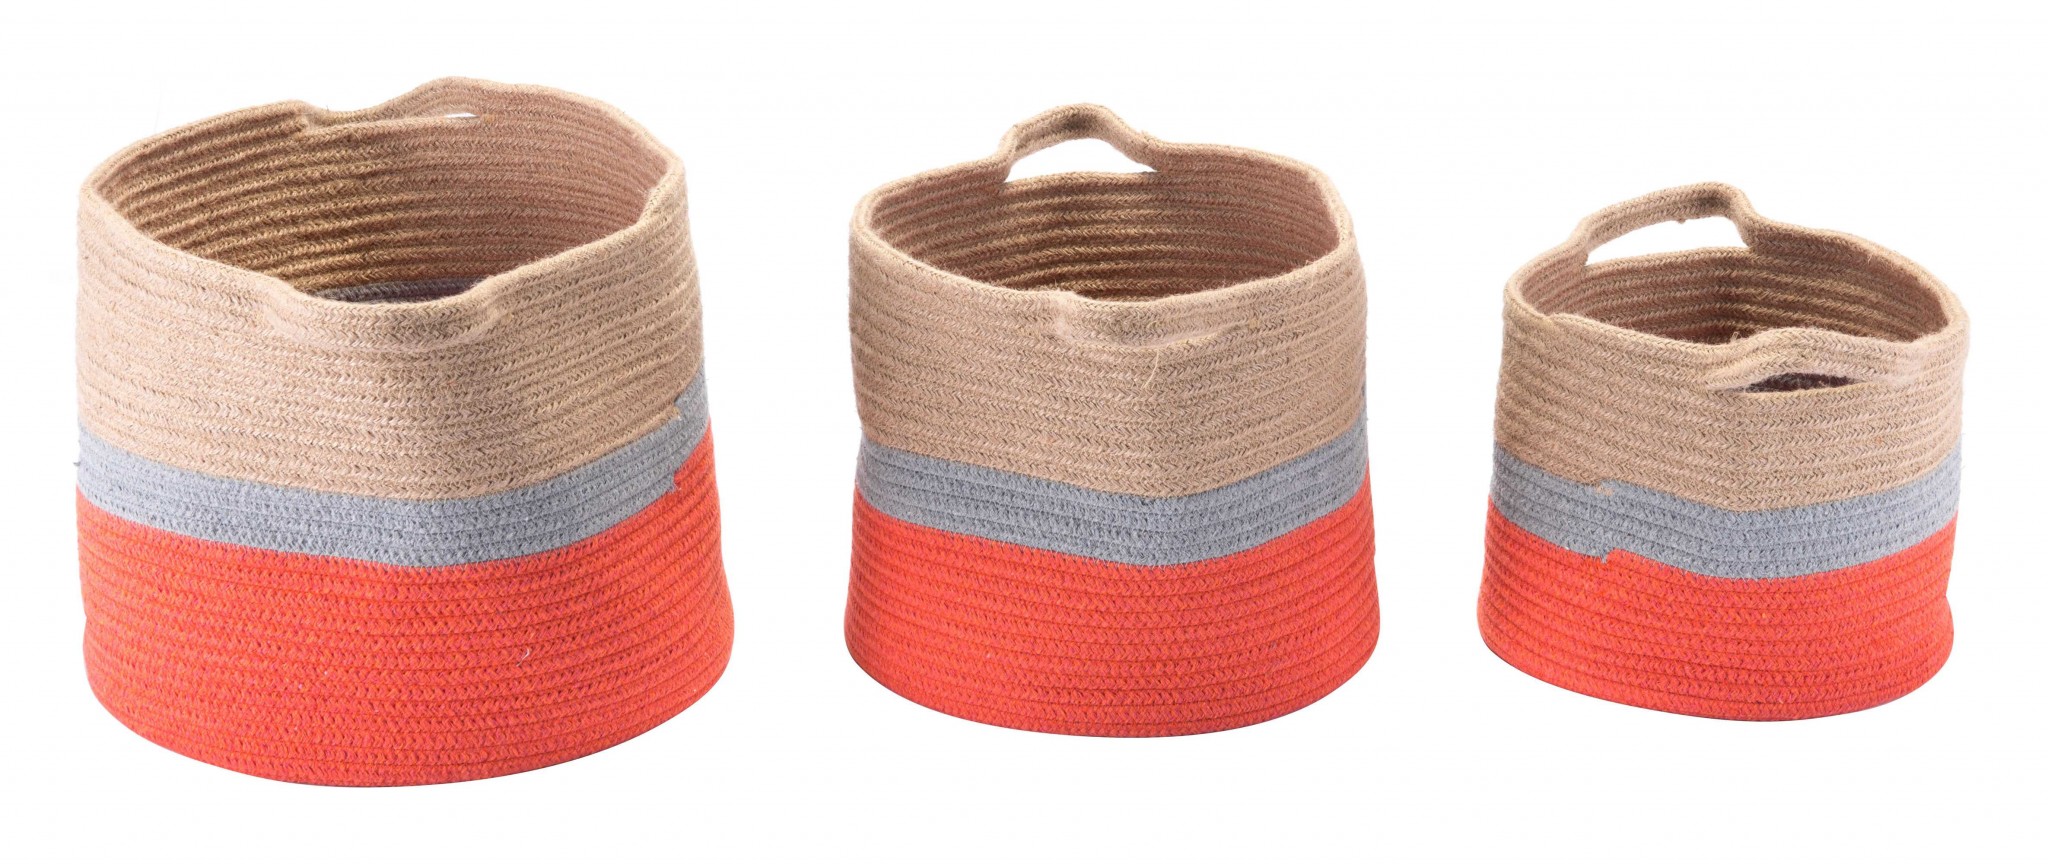 10.2" x 10.2" x 8.7" Multicolor, Jute, Baskets With Handles - Set of 3